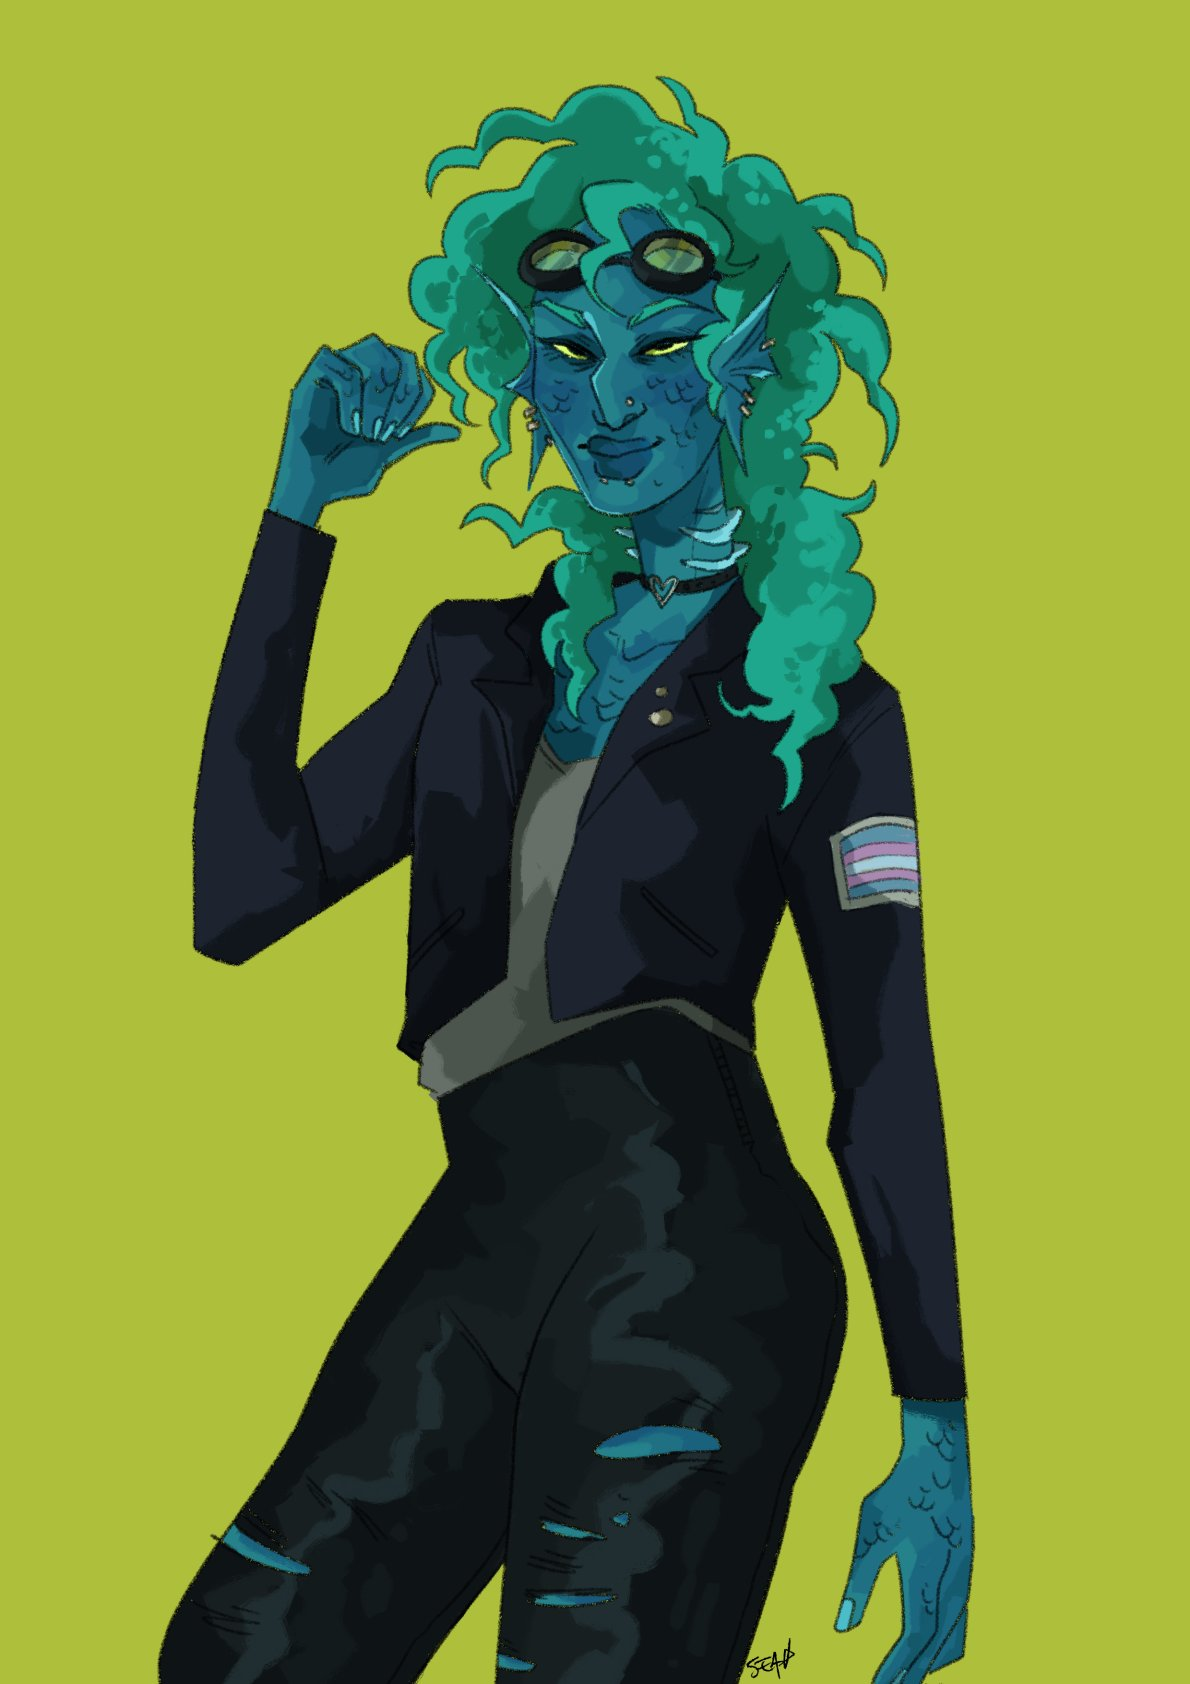 A digital illustration of Ver'million Blue with blue-green hair and blue skin. She's wearing ripped leather pants, a black choker, goggles pushed up on her head, and a leather jacket with a trans pride flag patch on the arm.